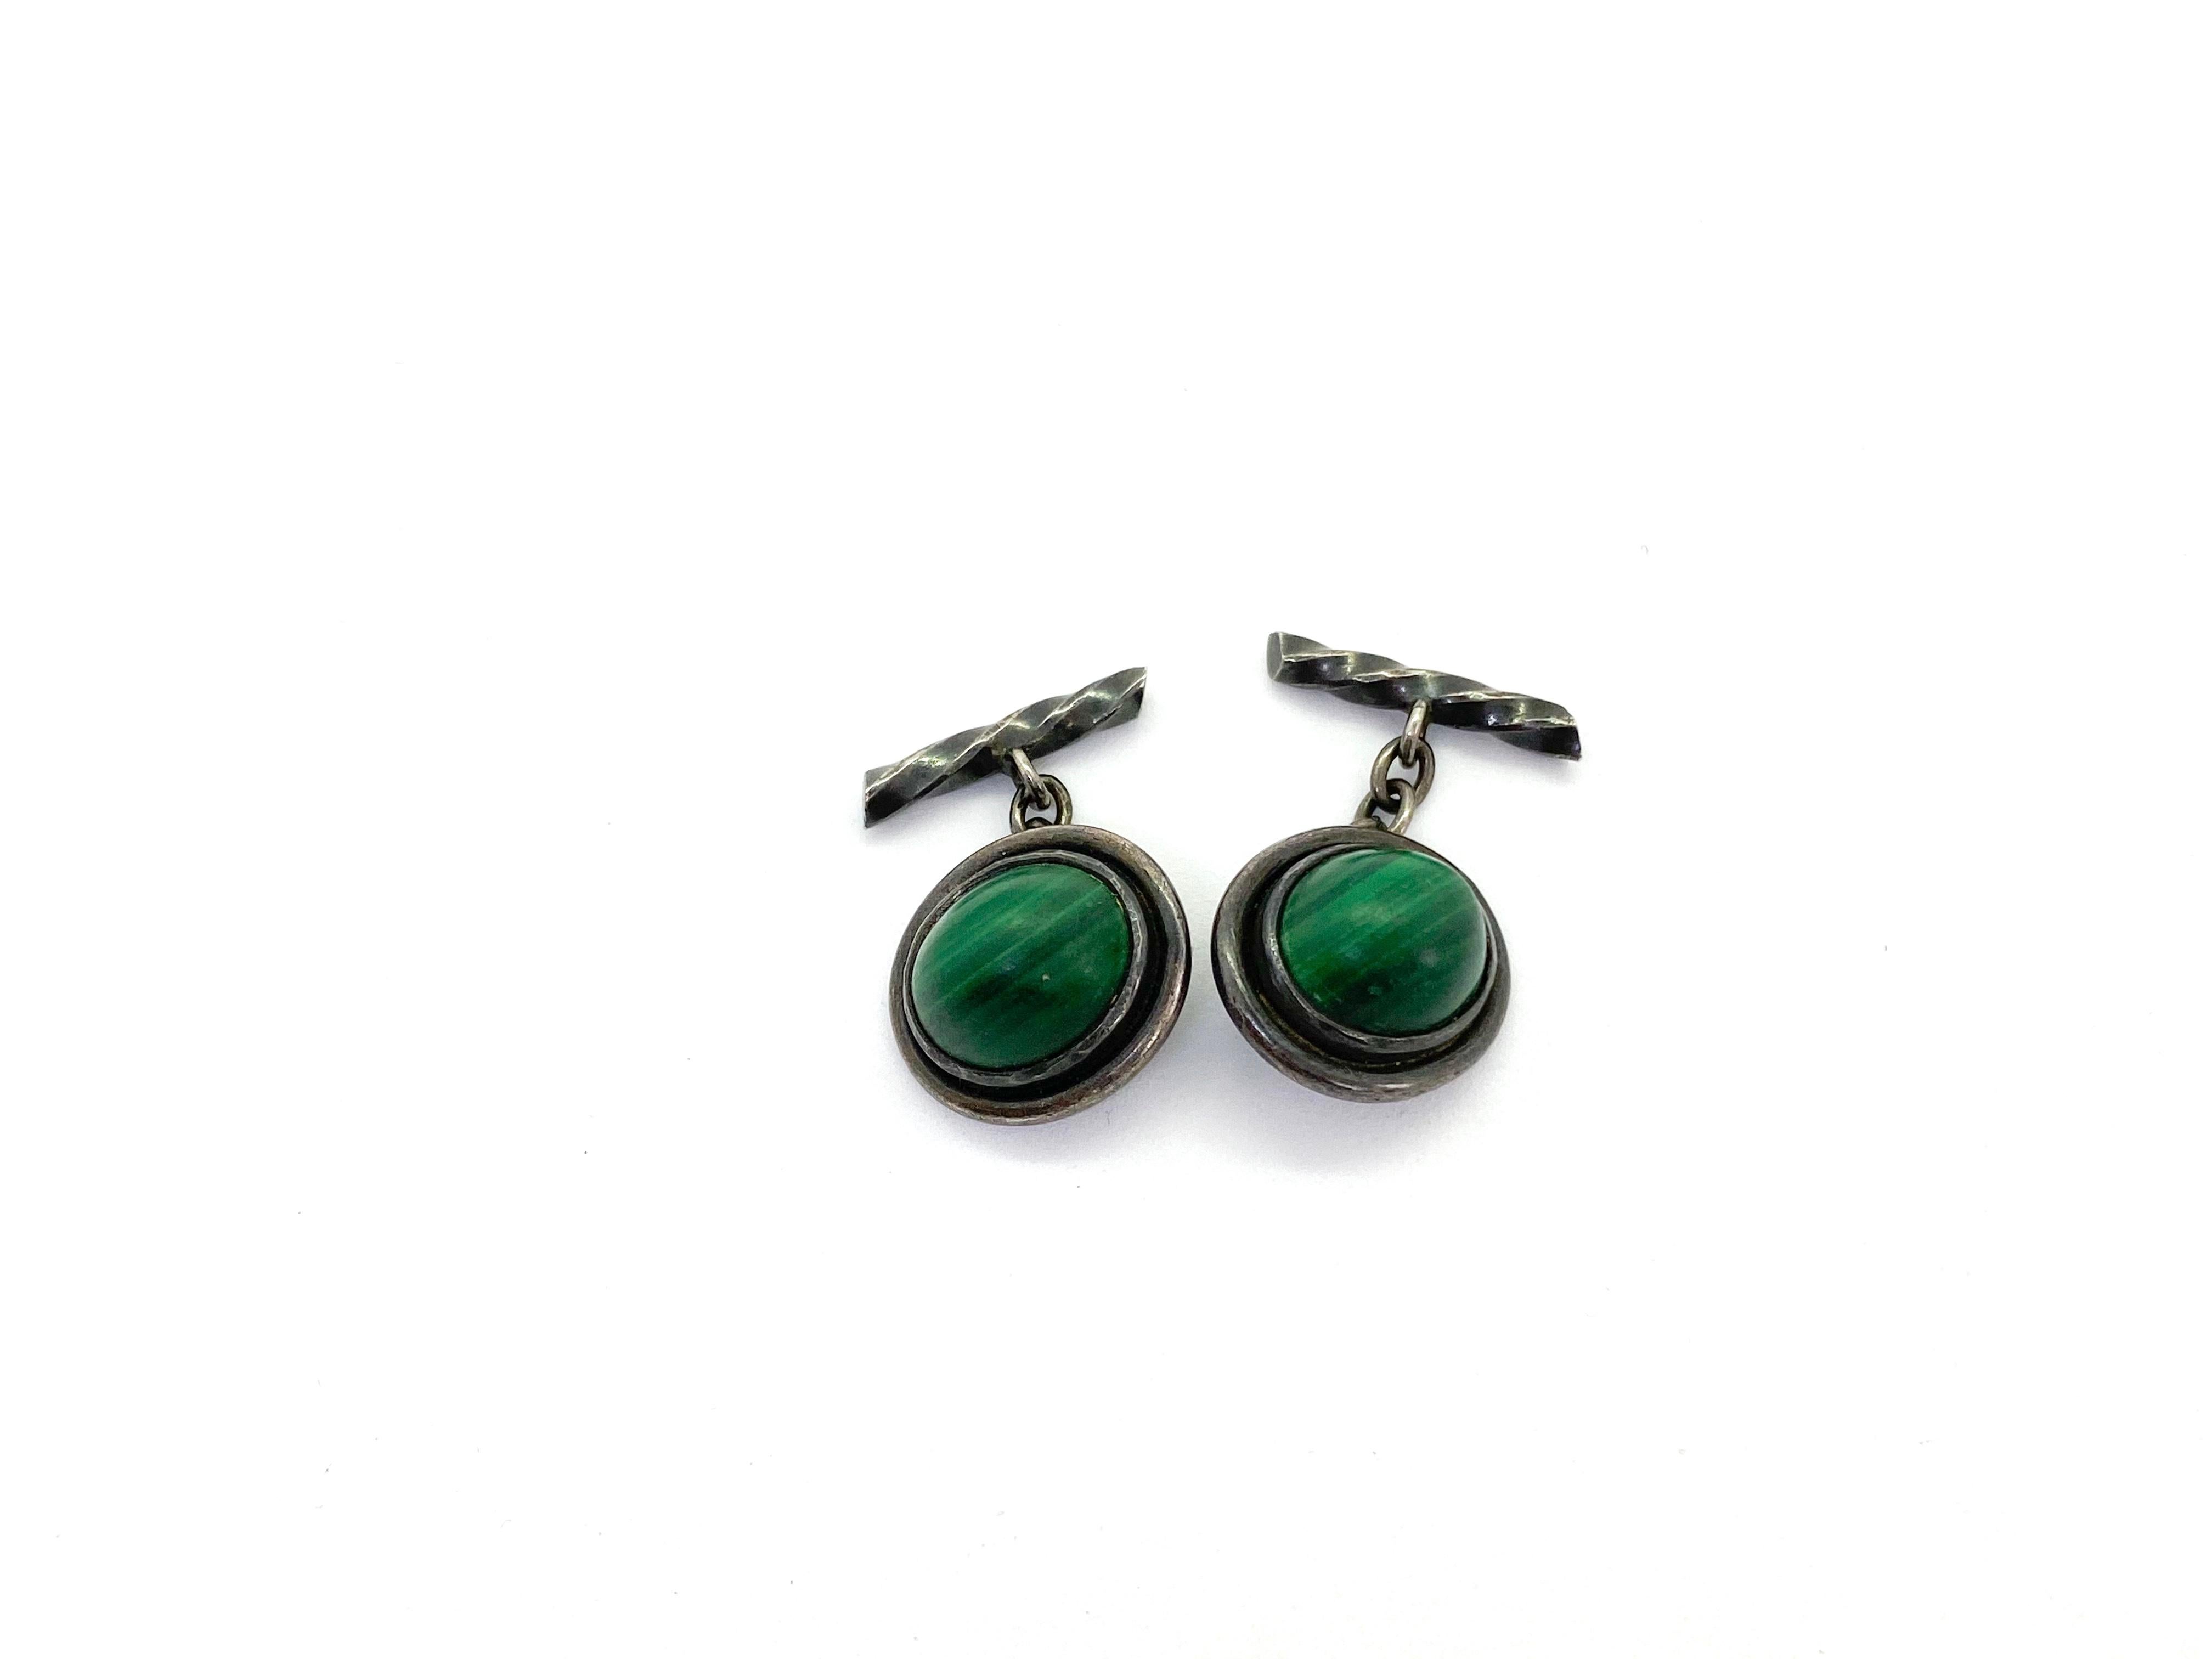 Silver Russia Malachite Cufflinks
No Stamps.
These made more likely Russia
Not polished or cleaned
Great cufflinks.